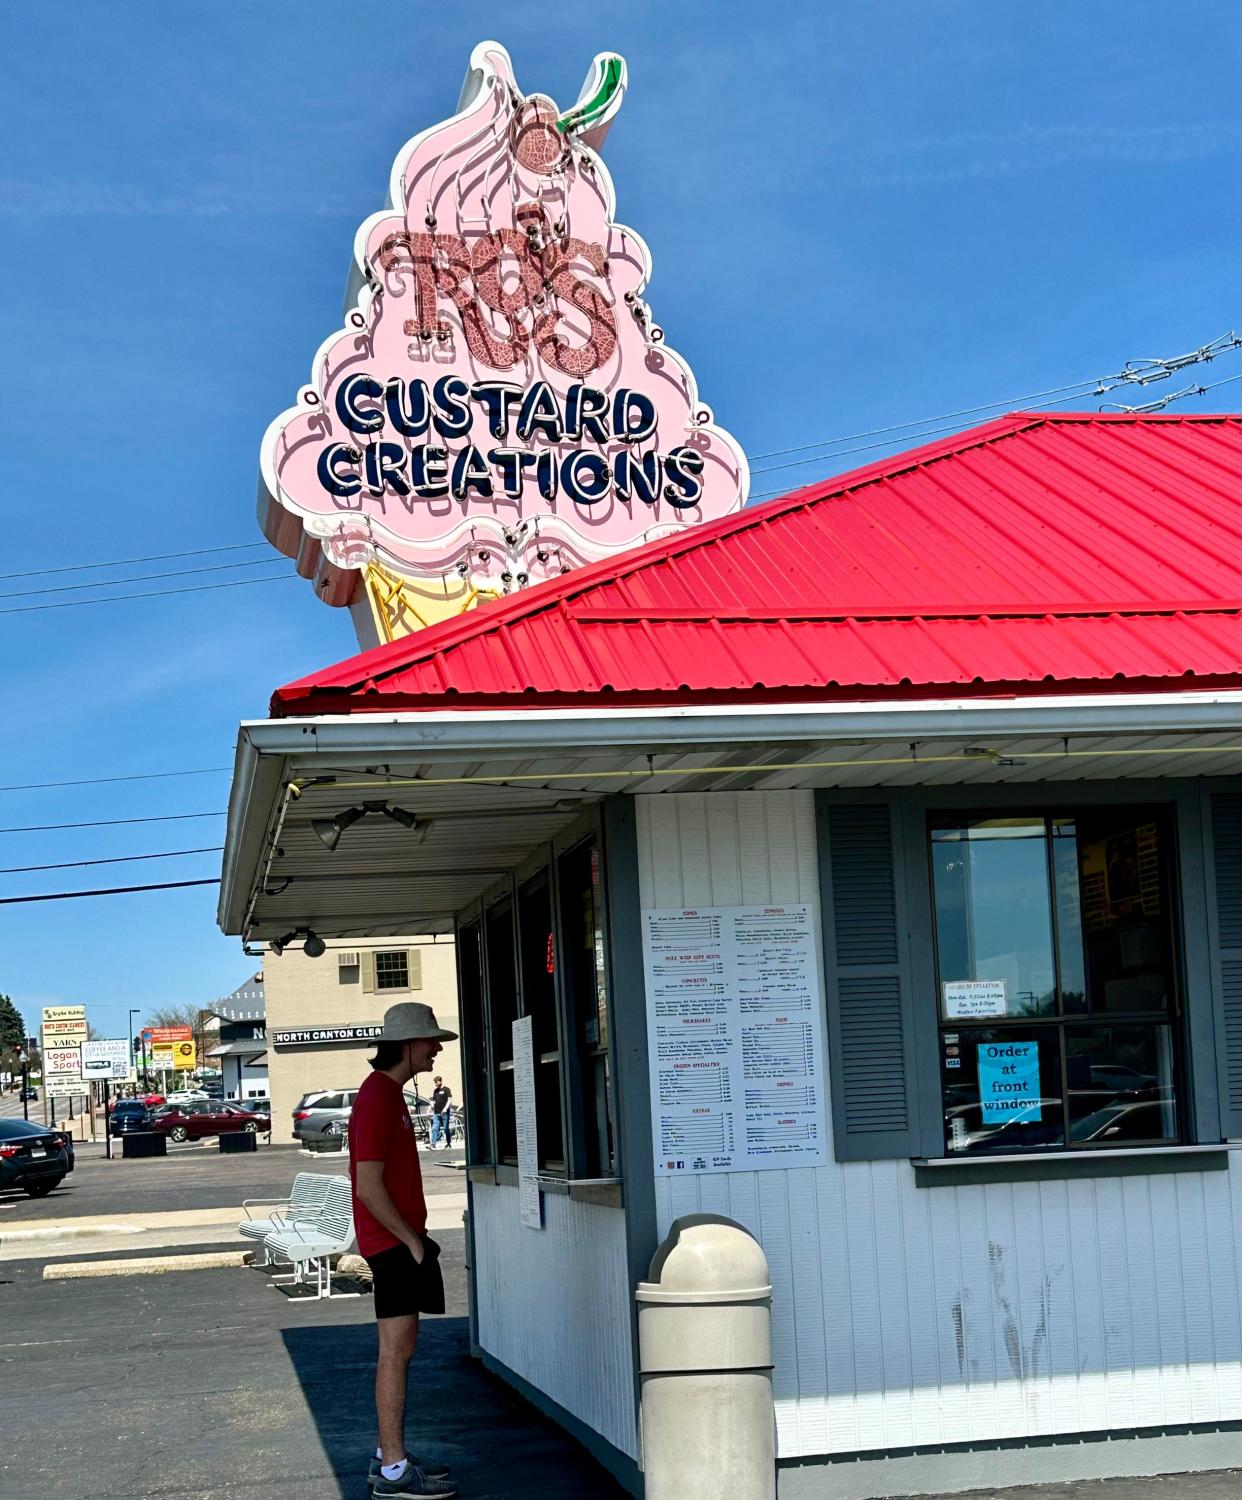 Ro's Custard Creations offers plenty of outdoor seating to relax with your scoop or two and soak in some Ohio sunshine.